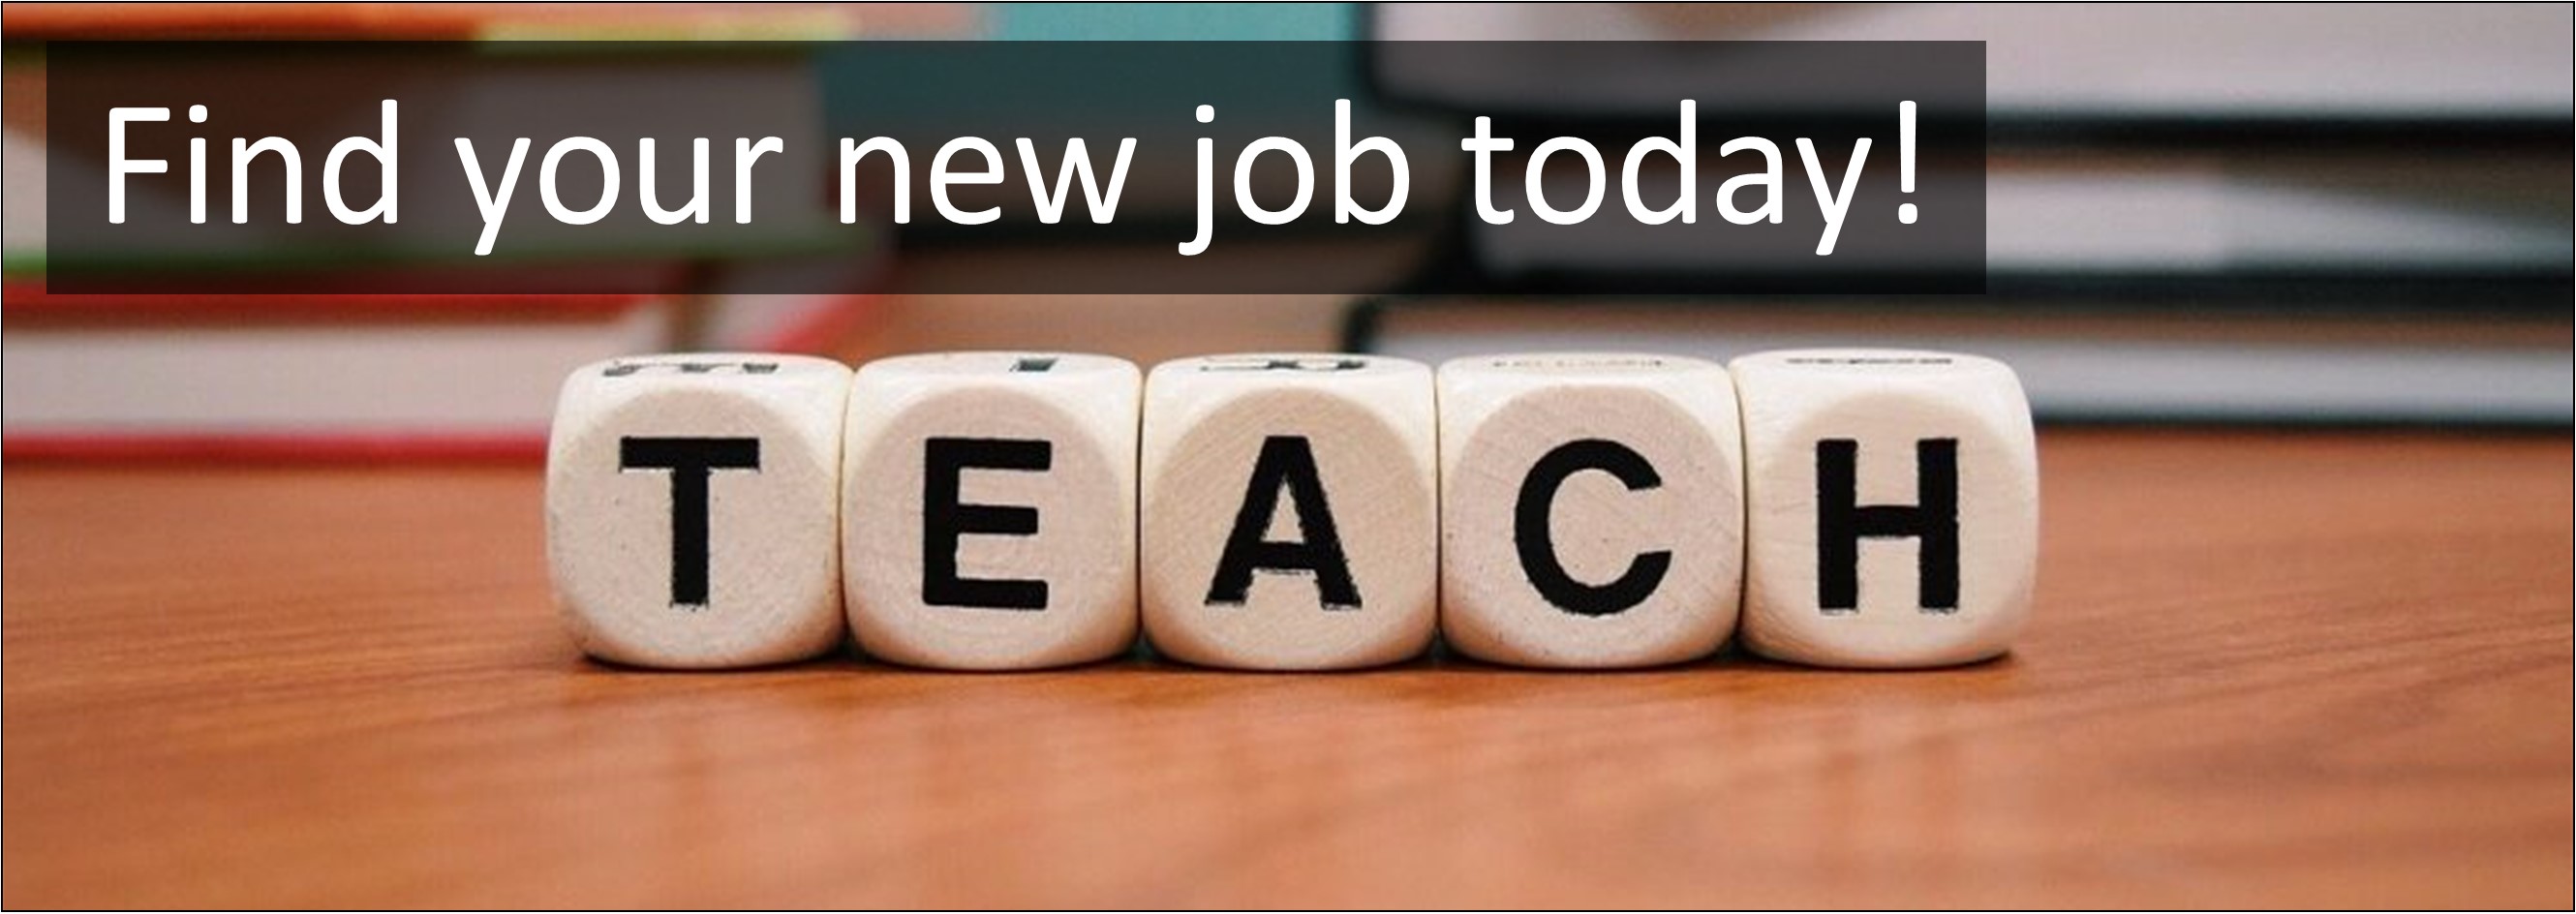 Teaching & Education Jobs. School Class Cover Supervisor Jobs, Careers & Vacancies in Hedge End, Southampton, Hampshire Advertised by AWD online – Multi-Job Board Advertising and CV Sourcing Recruitment Services